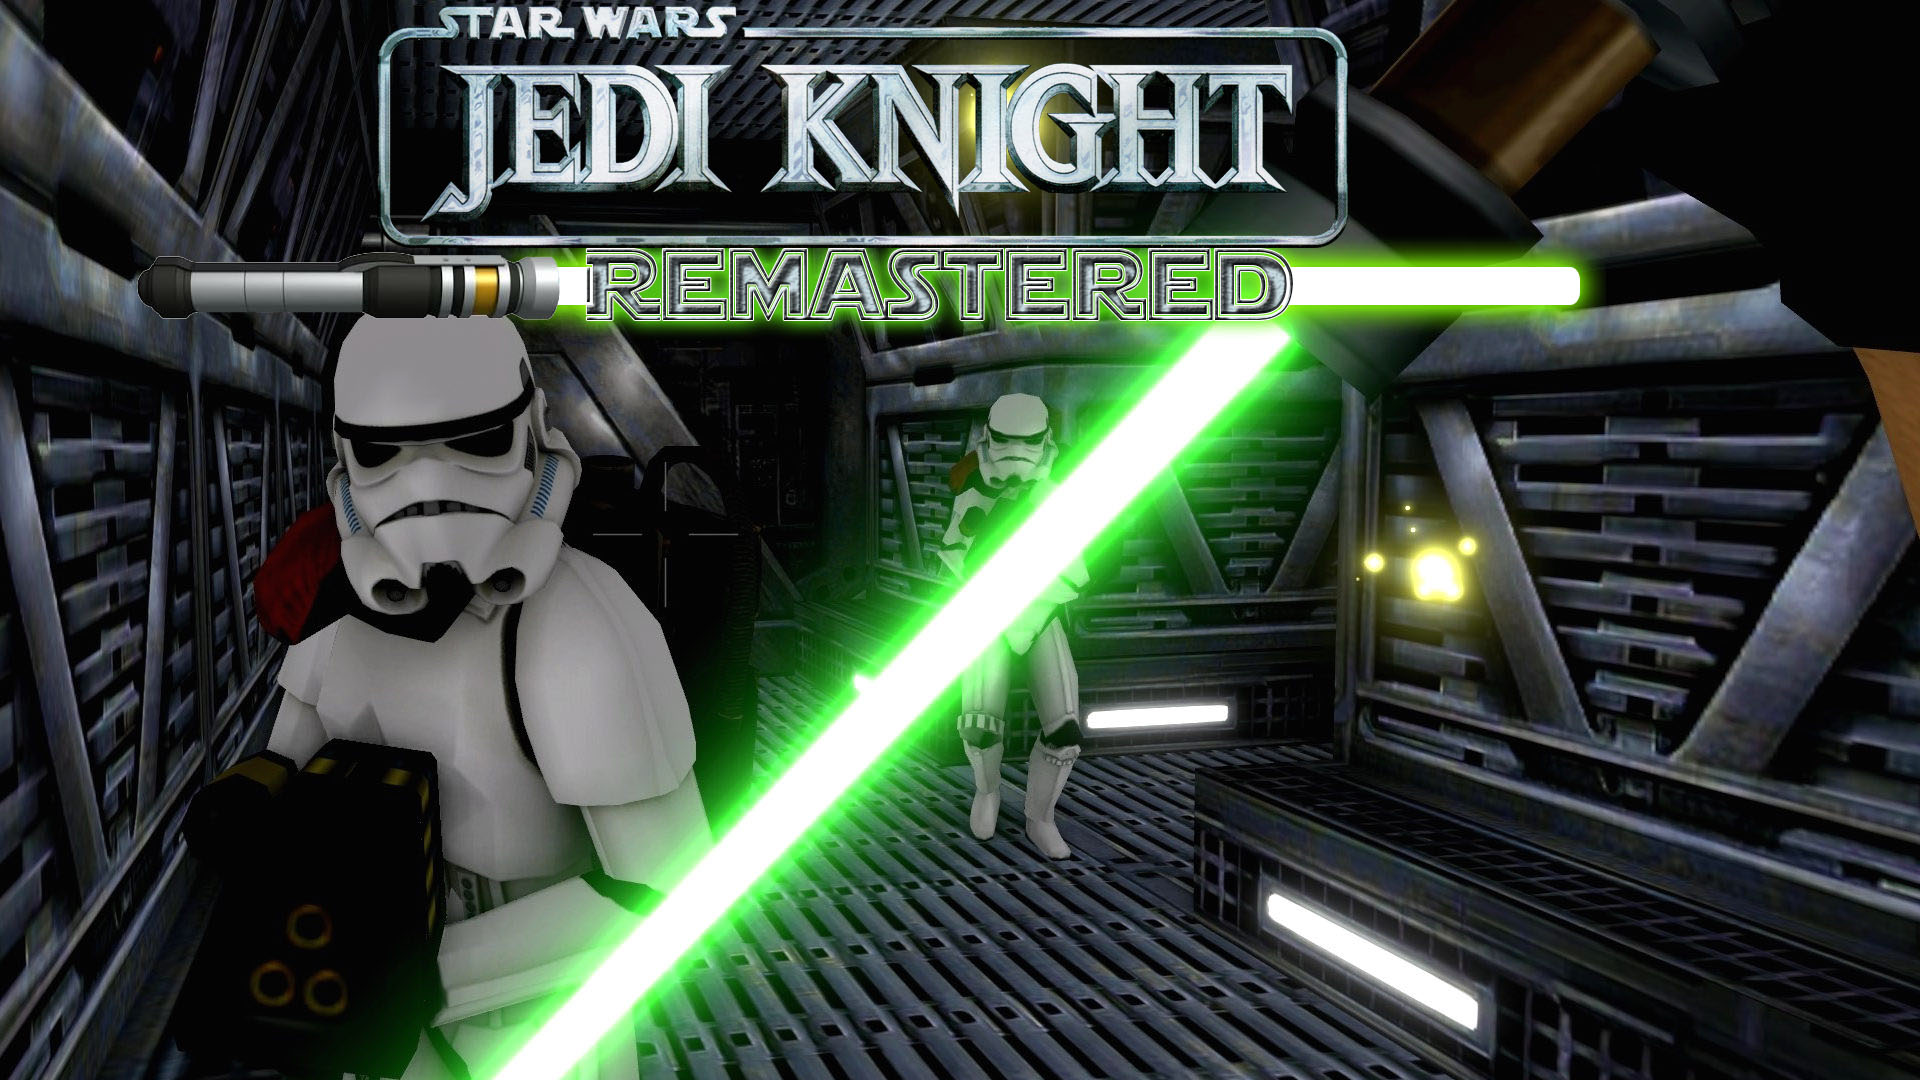 jedi academy knights of the force download